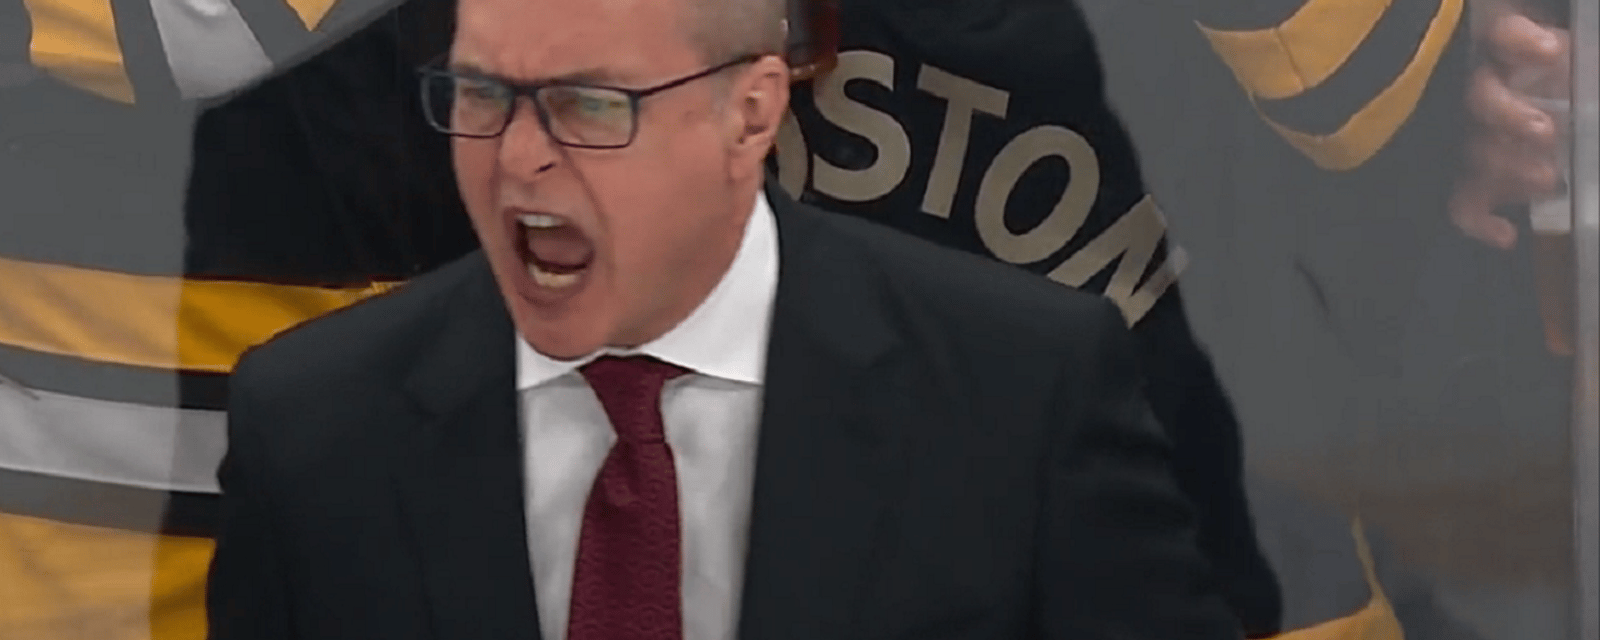 Paul Maurice irate over penalty call in Game 7.